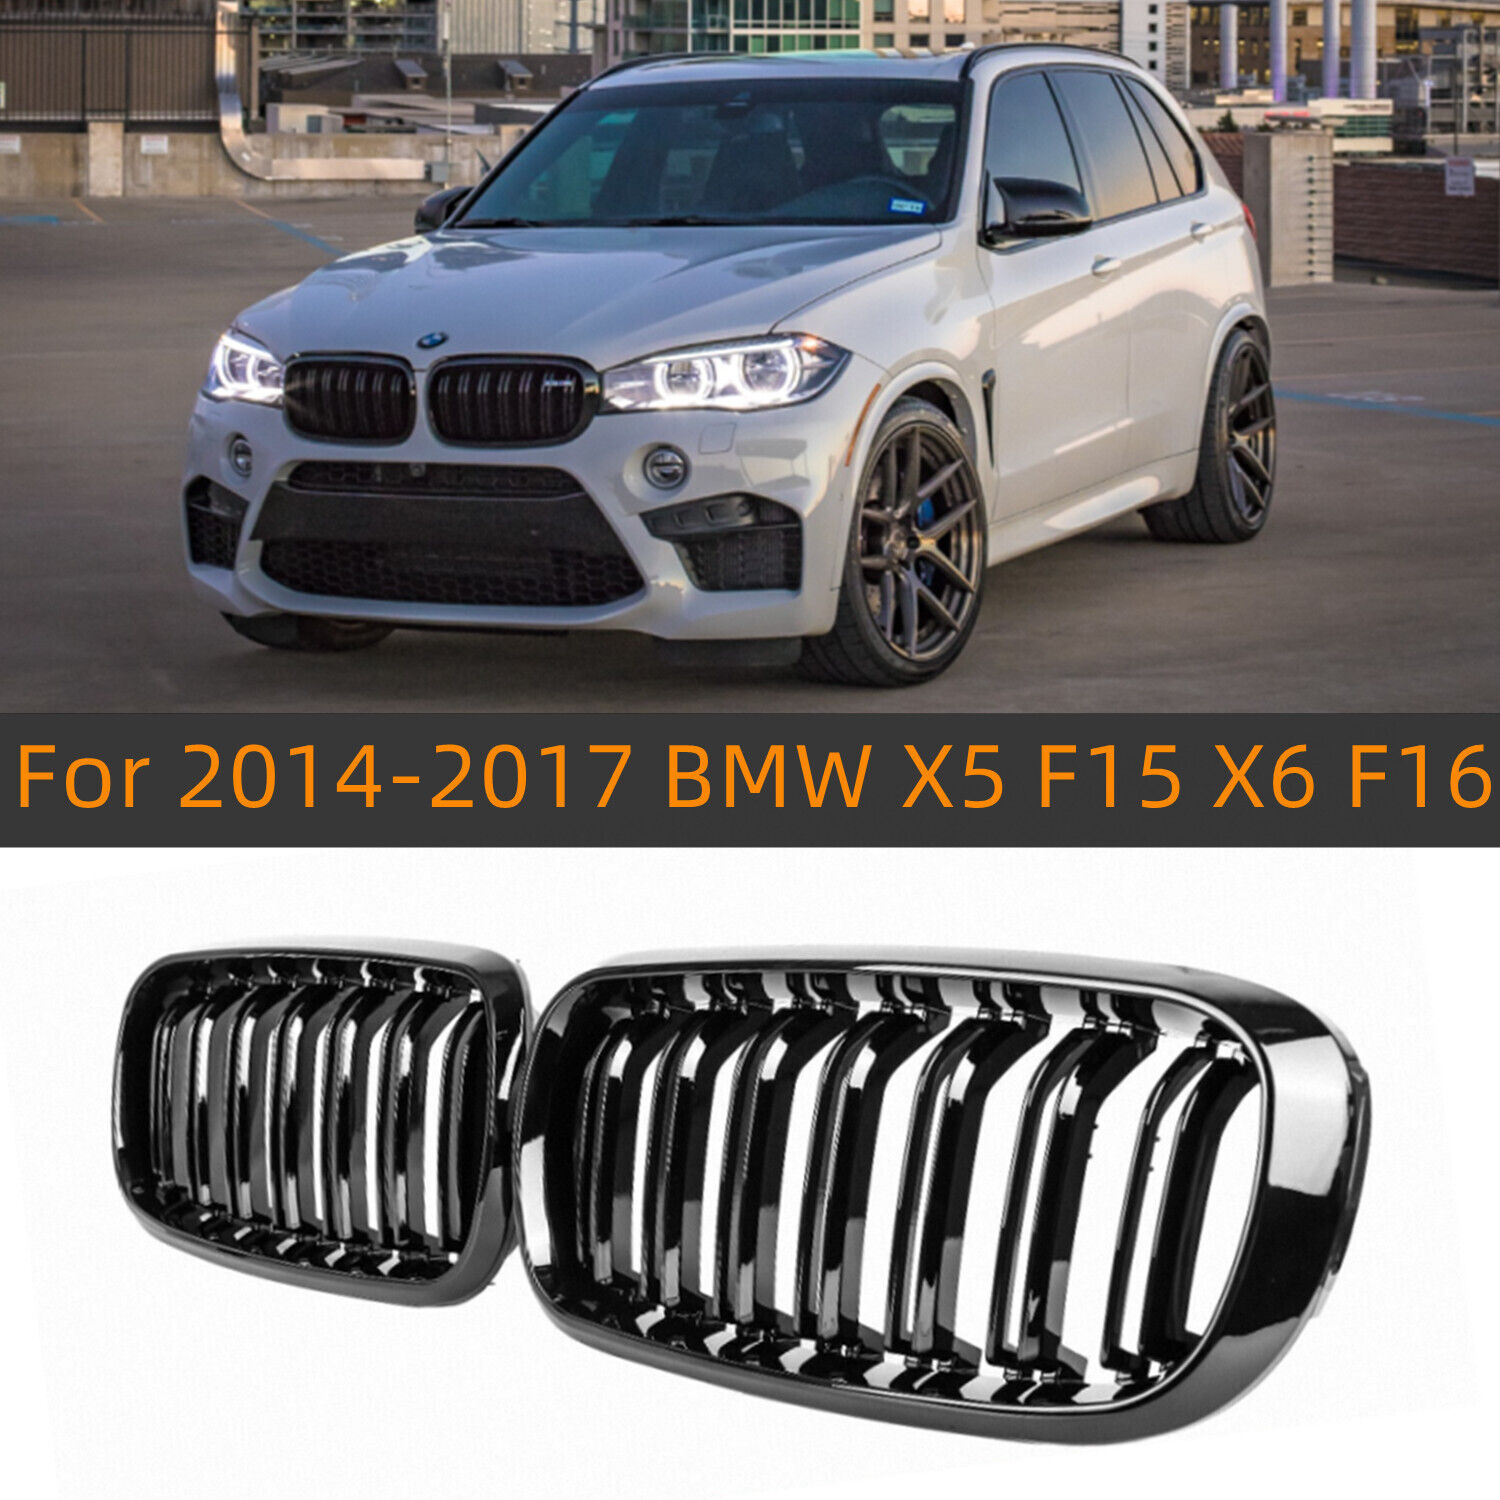 Gloss Black For 2014-2018 BMW X5 X6 F15 F16 Front Bumper Kidney Grille Grill